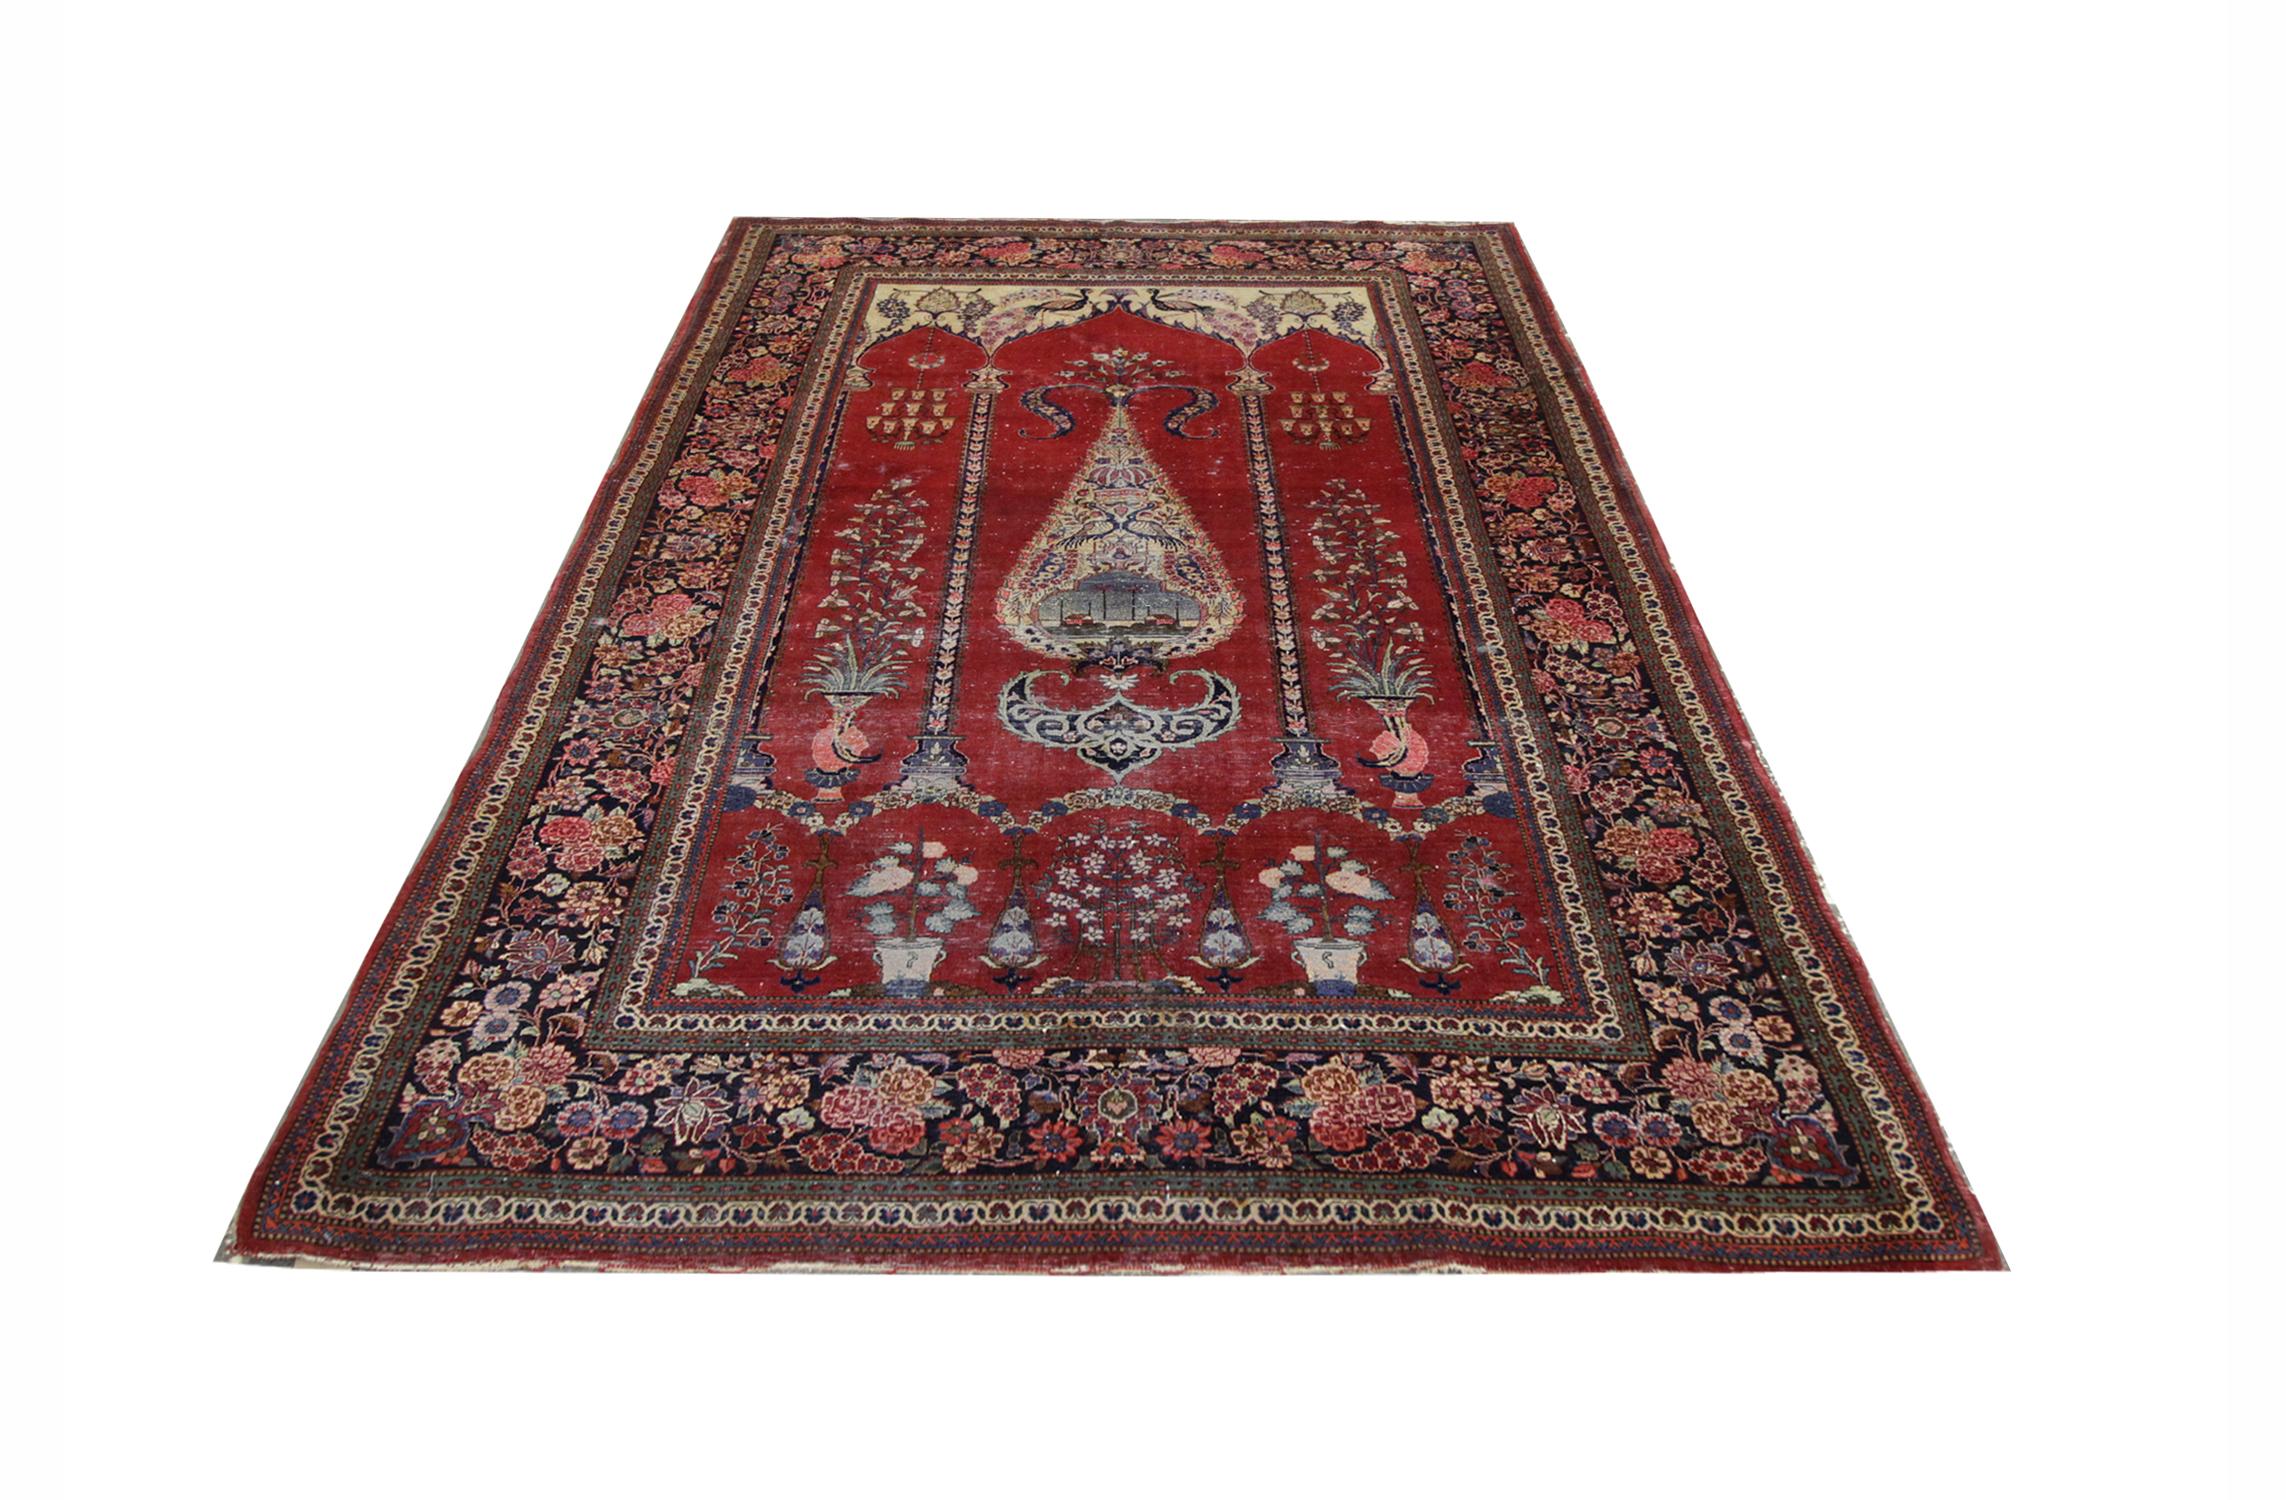 The border of this oriental rug is rich in floral design, intricately woven on a background of black so the beautiful colors pop. The central design of this rug sits on a deep red background and has detailed designs of chandeliers, tree of life,